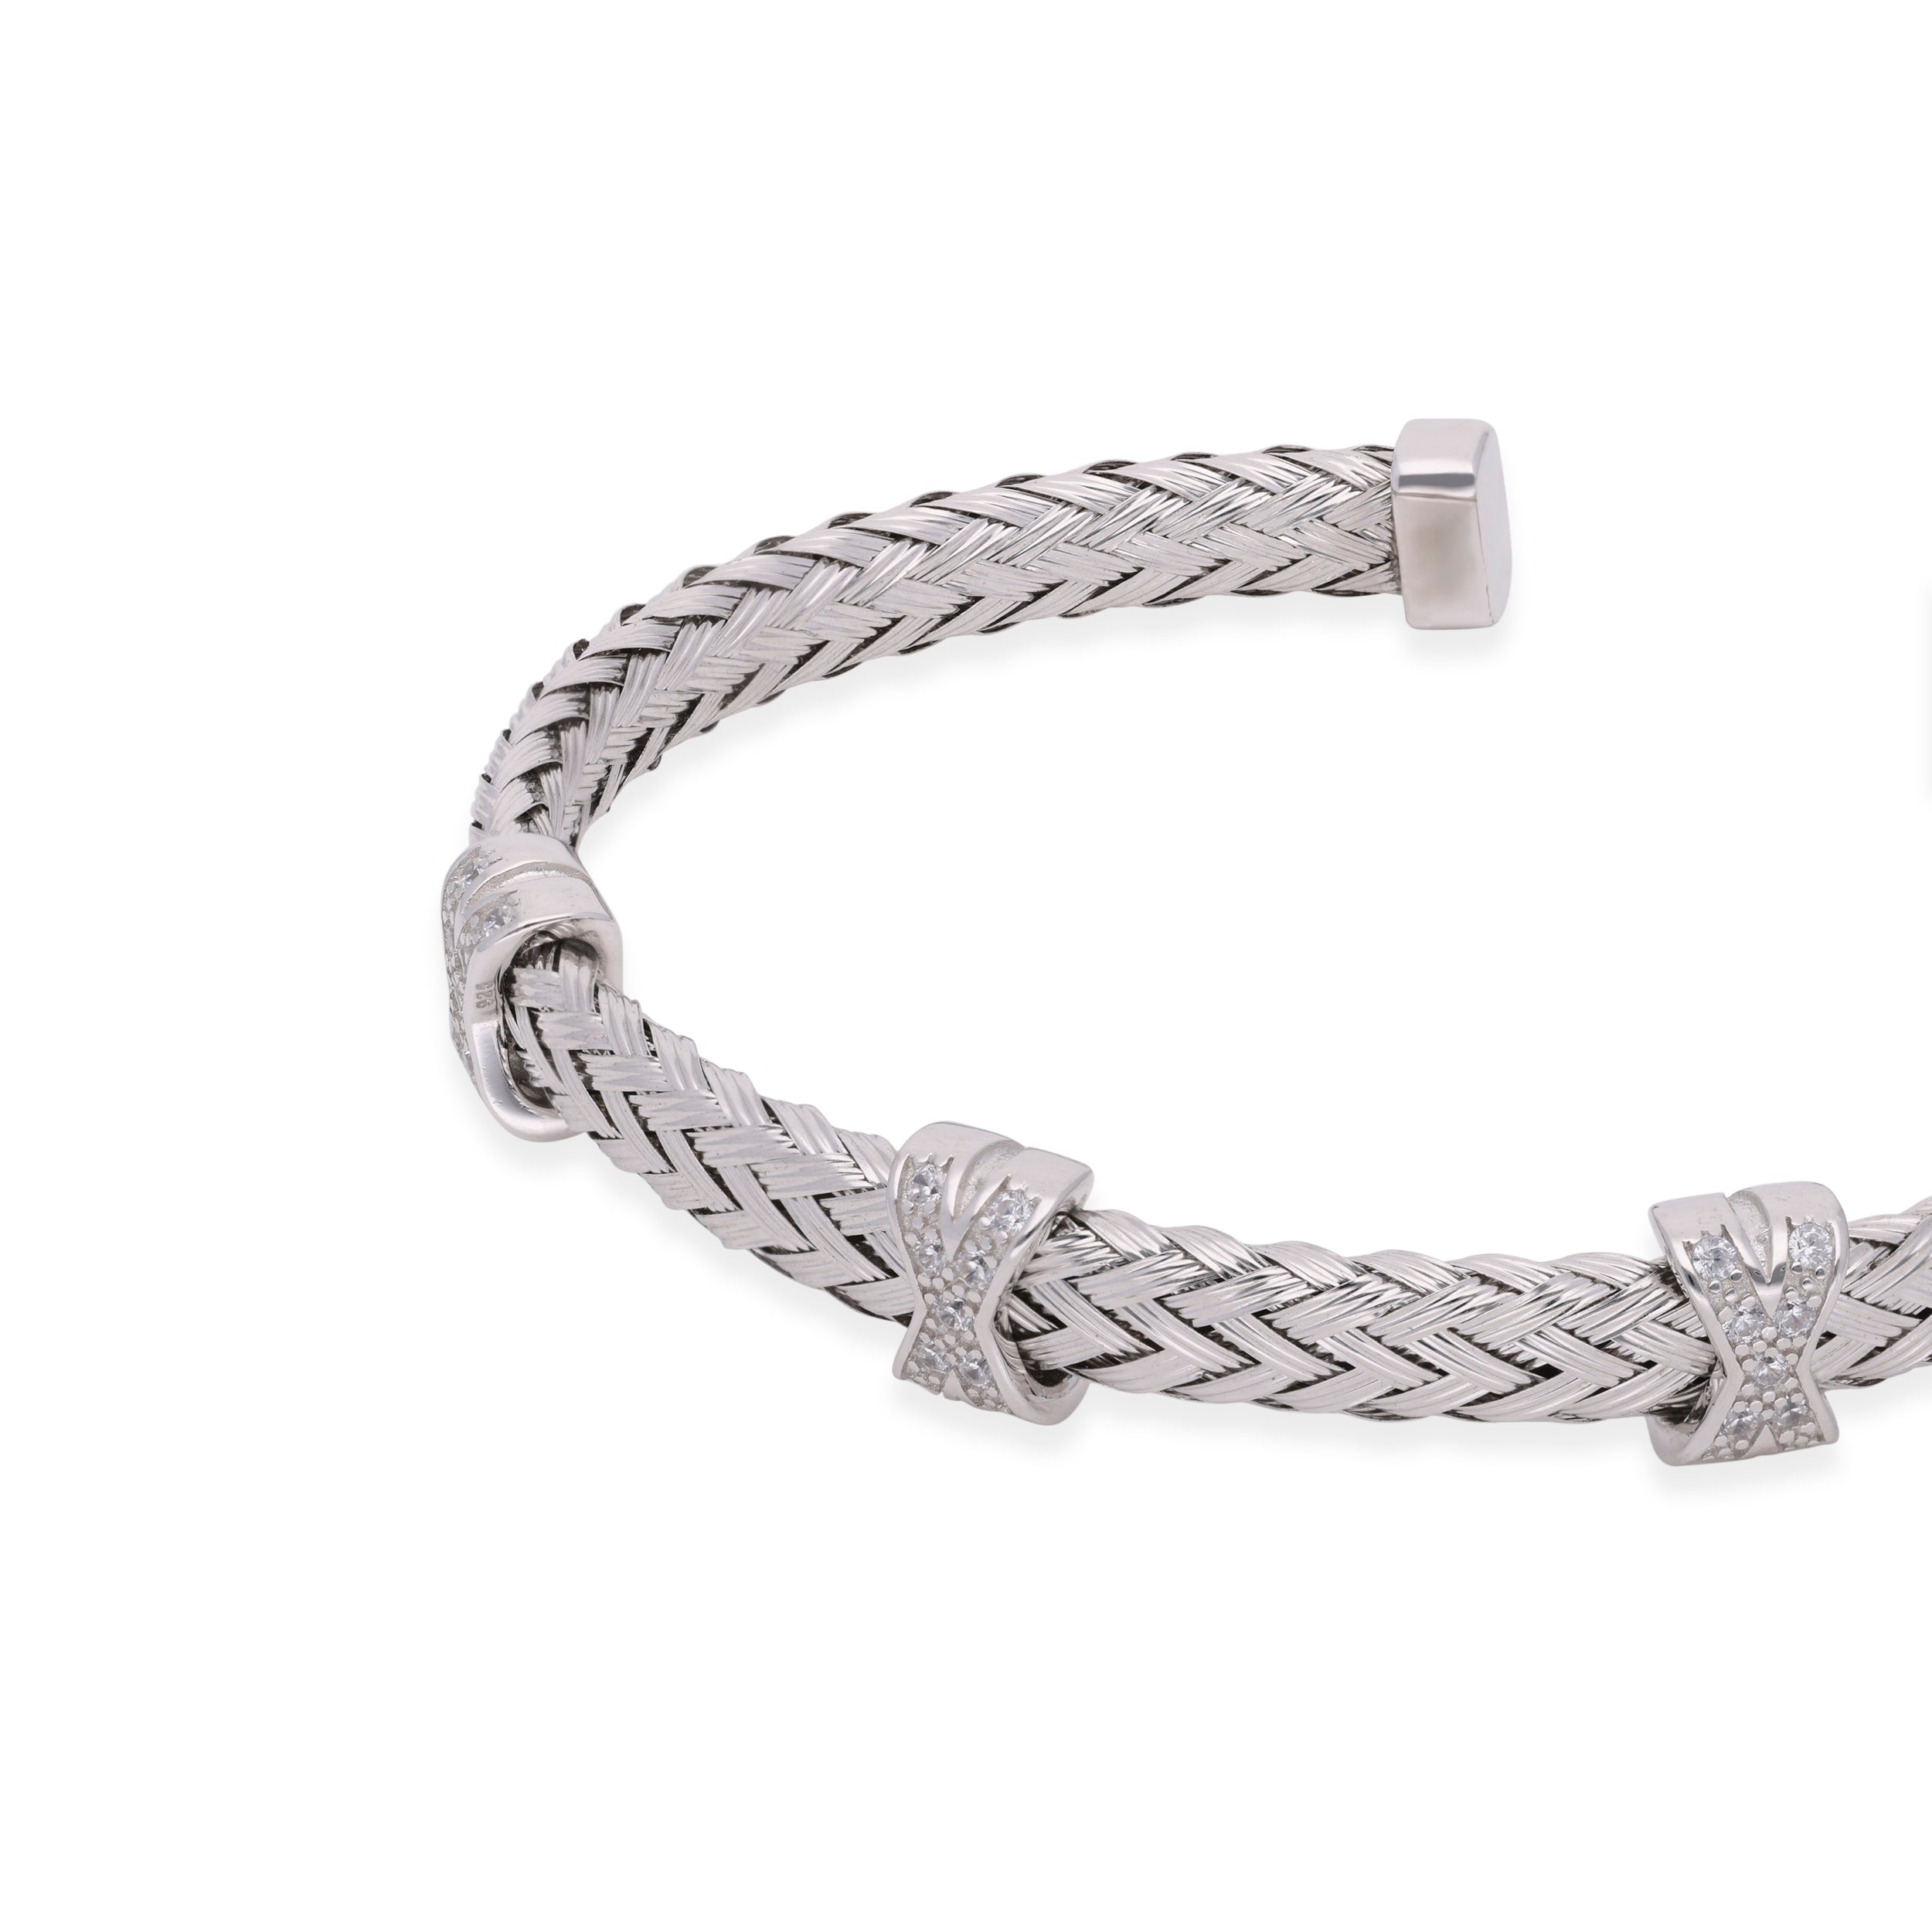 Woven Sterling Silver Cuff Bracelet with Diamond Cross Accent | SKU : 0003111796